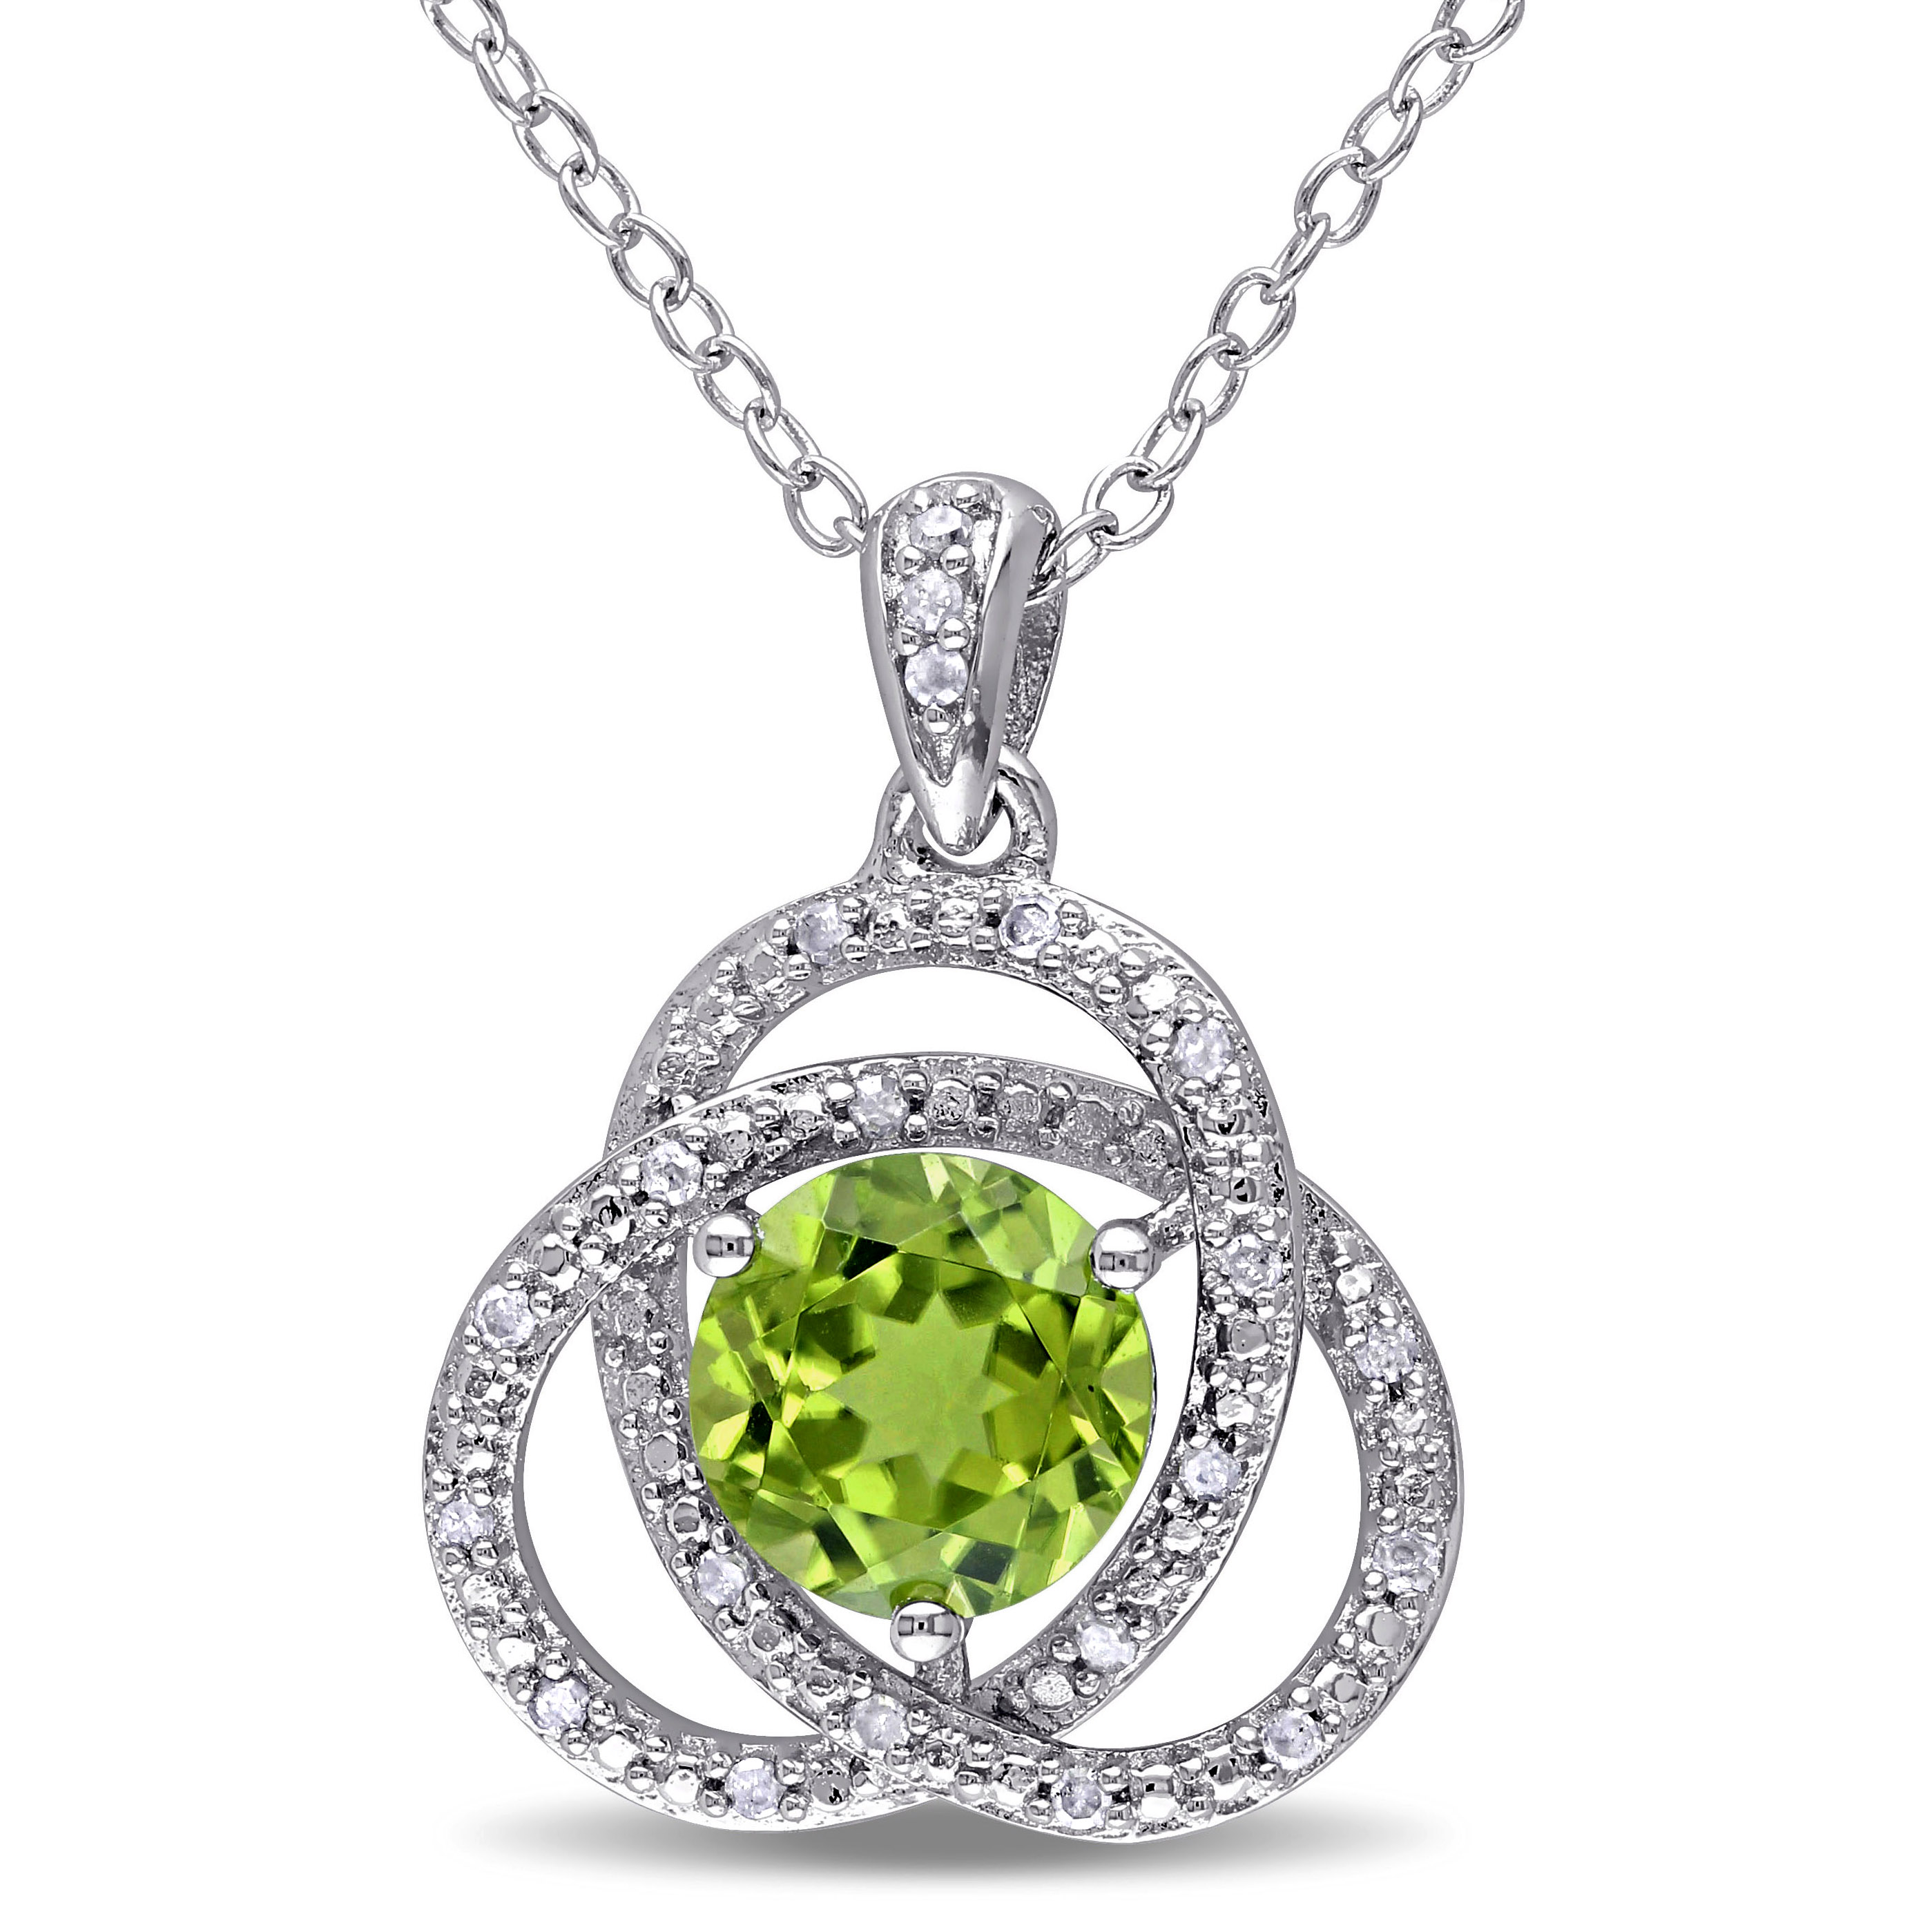 1/10 CT TW Diamond and Peridot Trillium Pendant with Chain in Sterling Silver